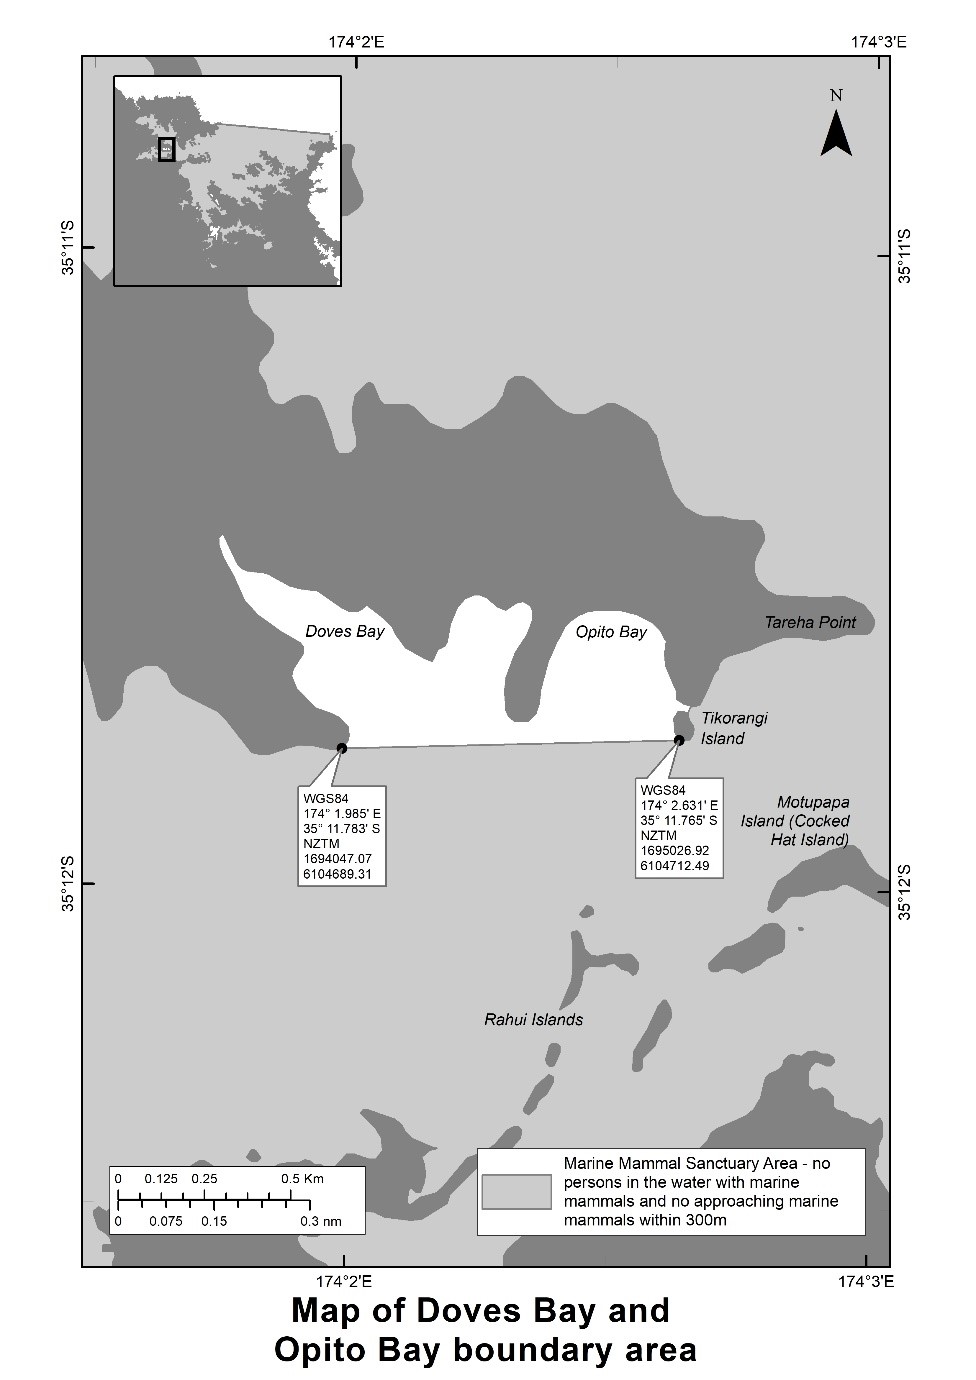 Map of Doves Bay and Opito Bay boundary area